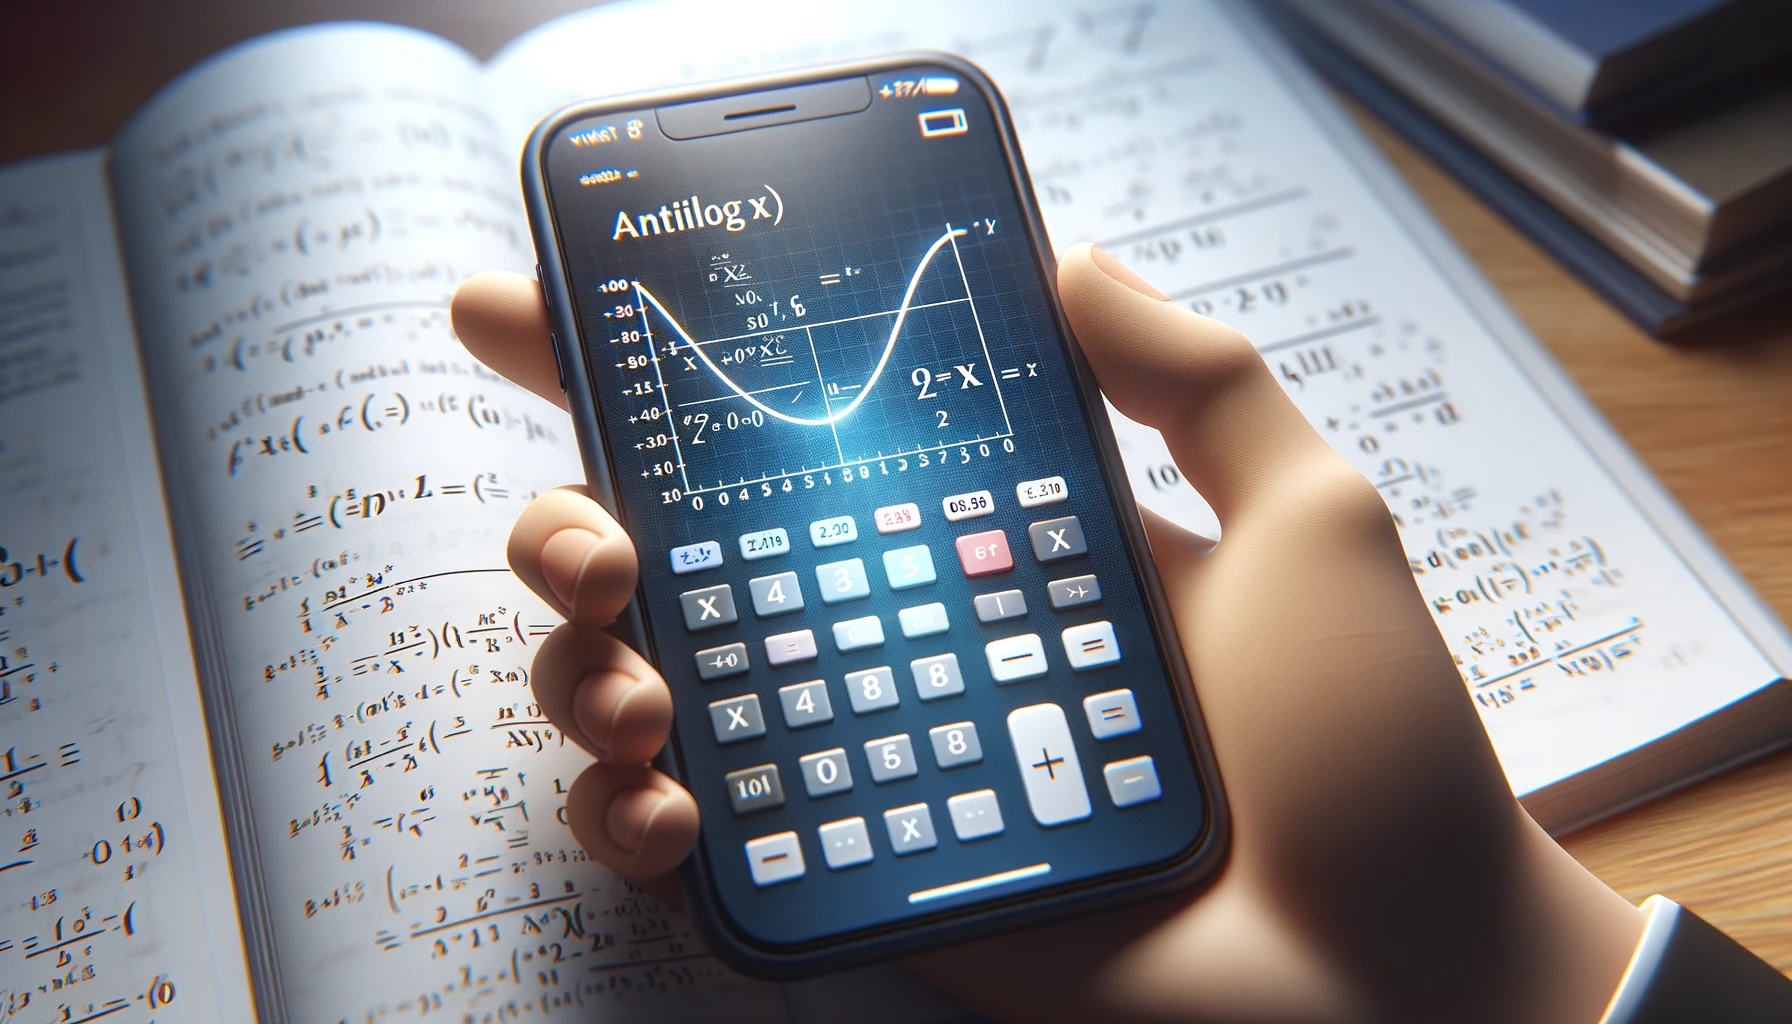 How To Find Antilog In Mobile Calculator